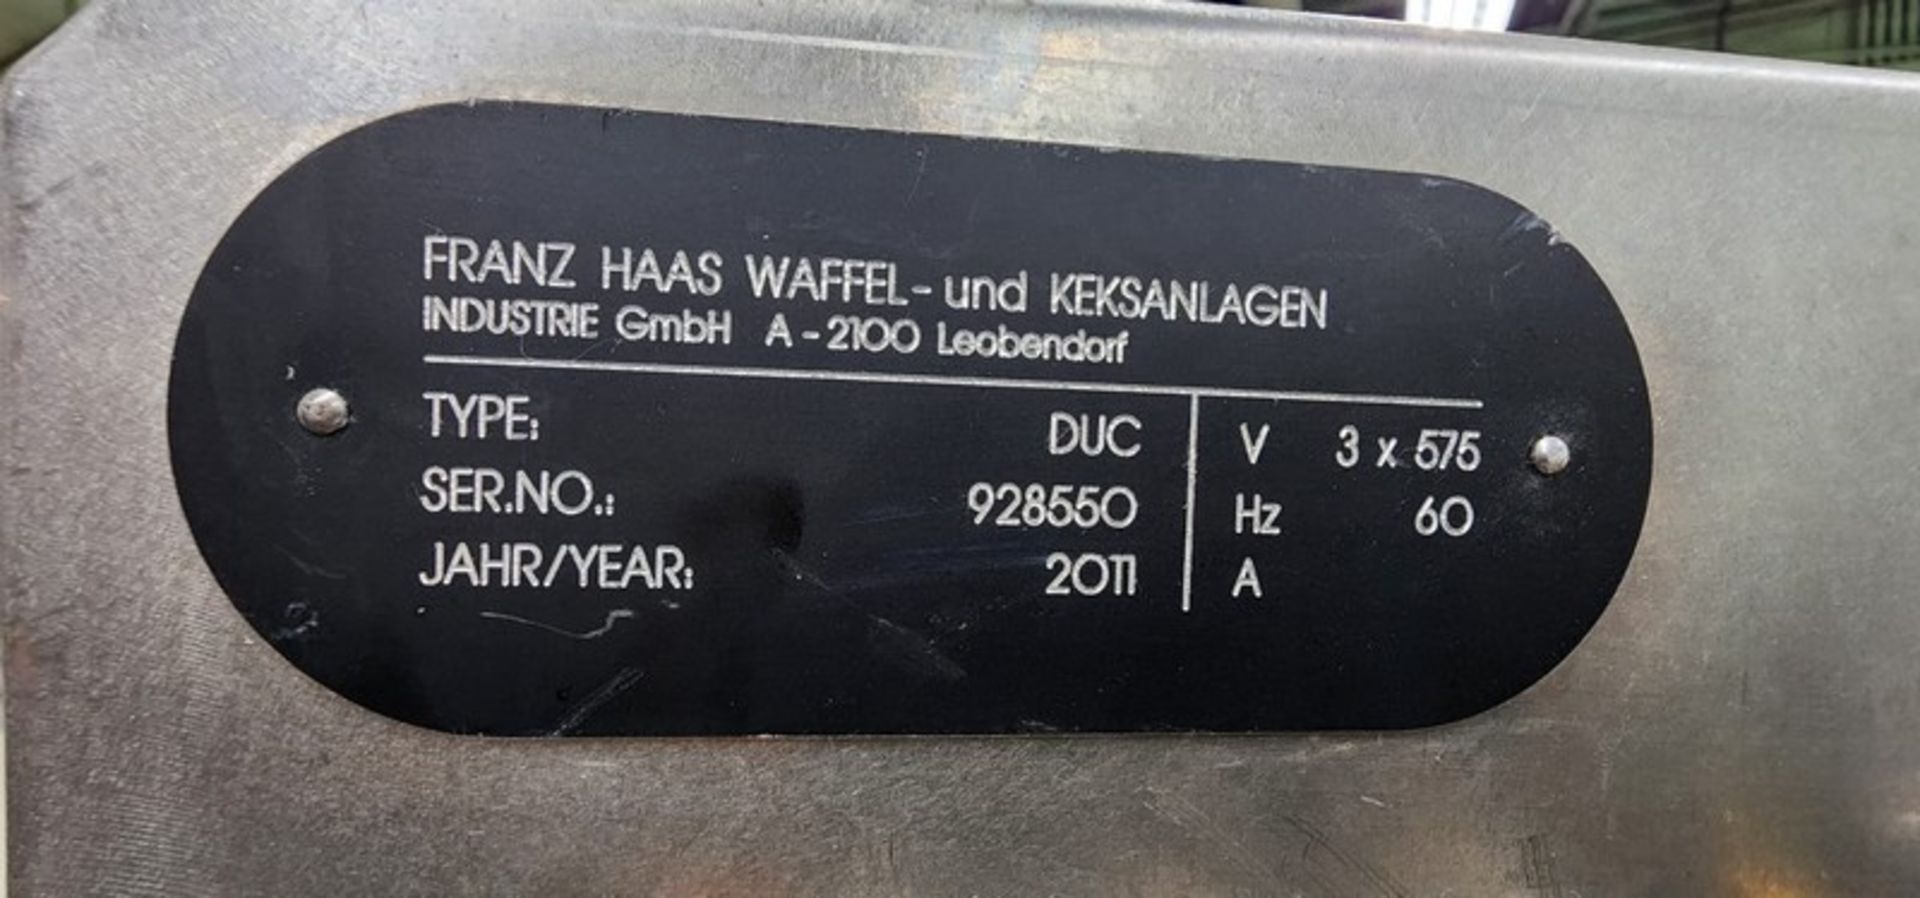 Rotary cookie Moulder Franz Haas Waffel and Keksanlagen System, Year 2011 Model DUC, Serial Number - Image 11 of 11